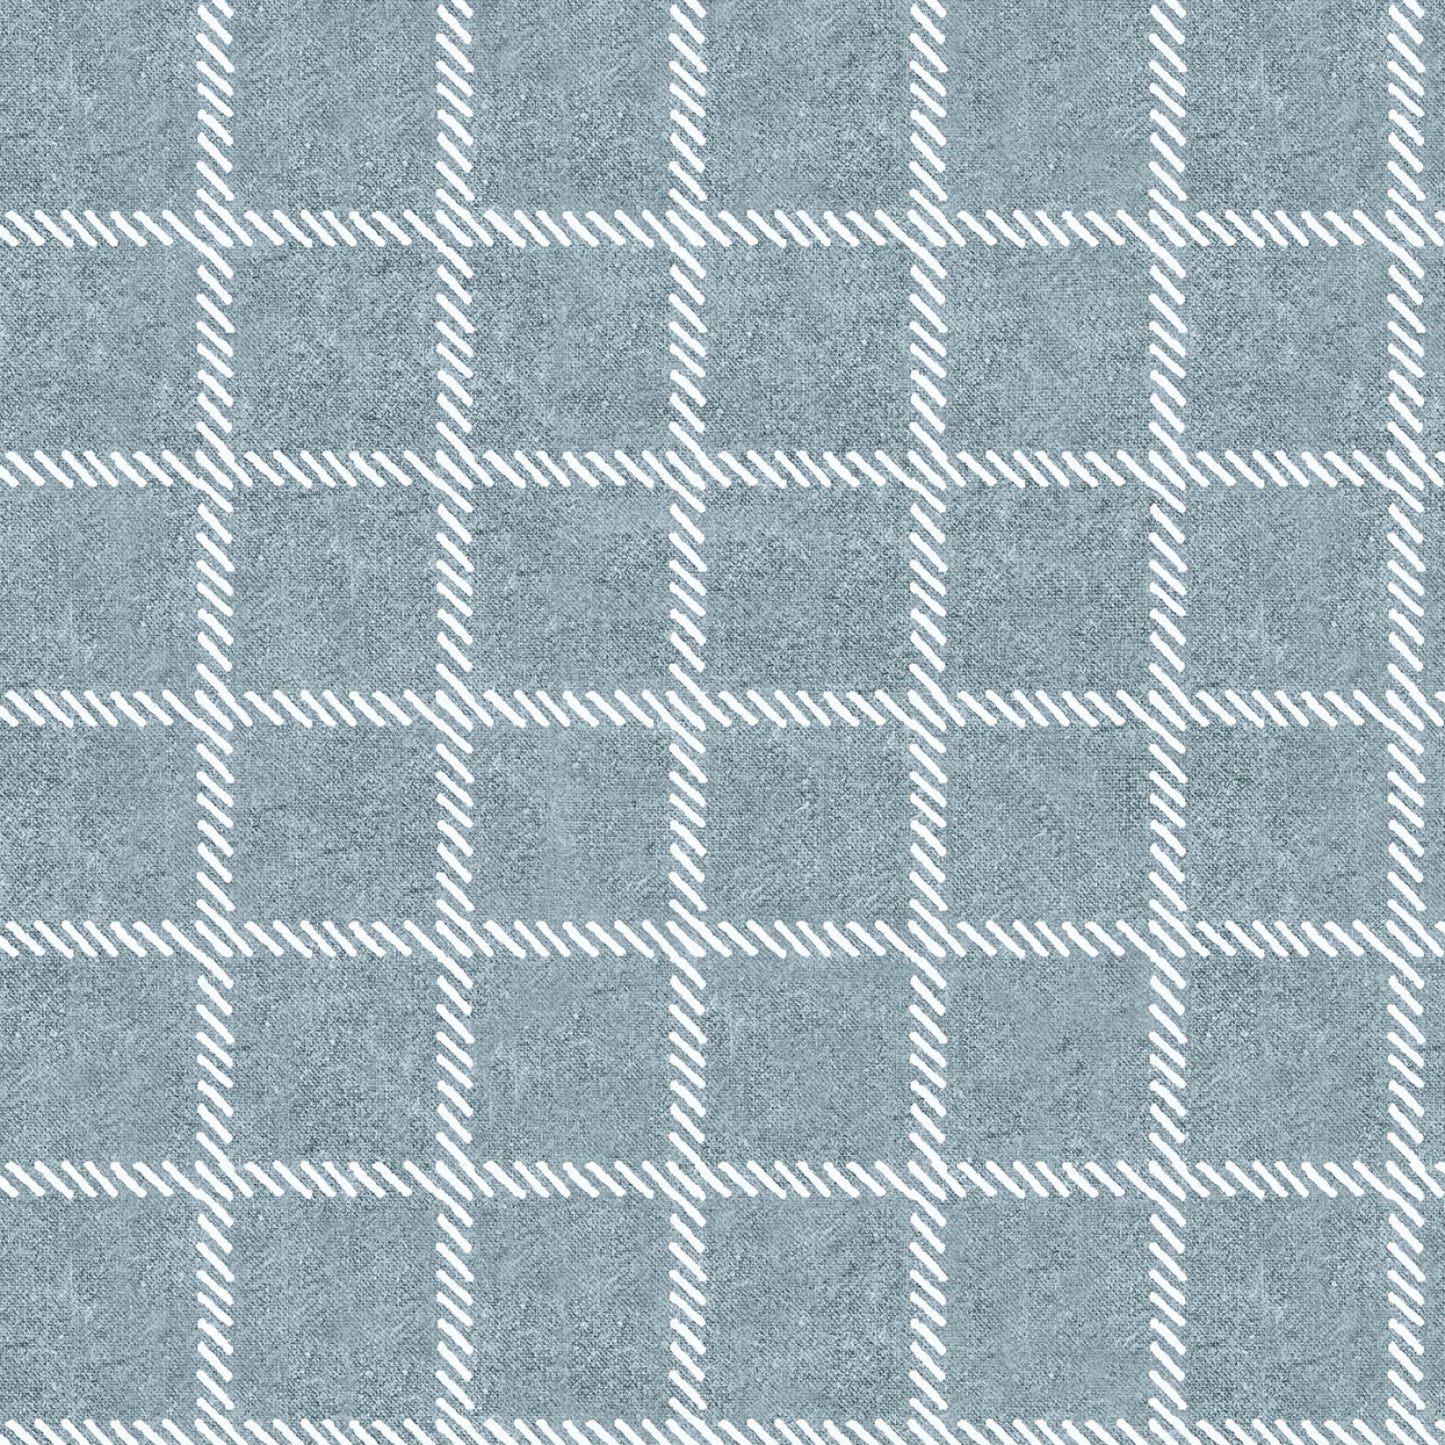 She Who Sew Home Deco by J. Wecker Frisch Windowpane Plaid Blue HD12503R-BLUE Home Deco Weight Cotton Fabric